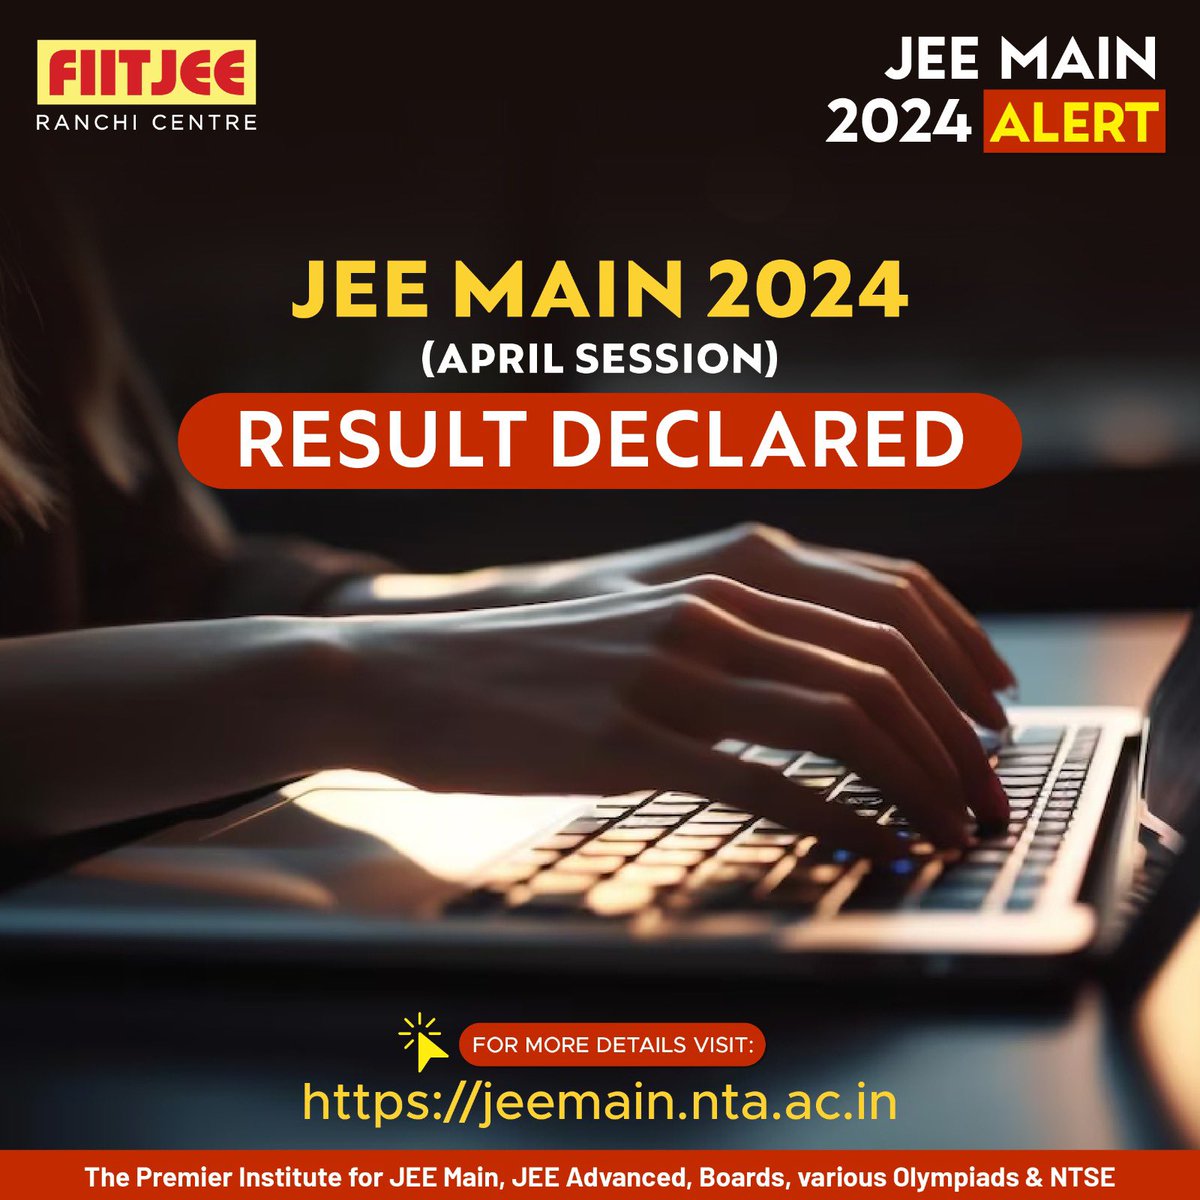 📣 Attention IITJEE Aspirants! 
The NTA has announced the JEE Main 2024 results! You can check your result from the official site: jeemain.nta.ac.in. 📚 

All the best 👍

#JEEMain2024 #JEEMain2024Results #FutureEngineers